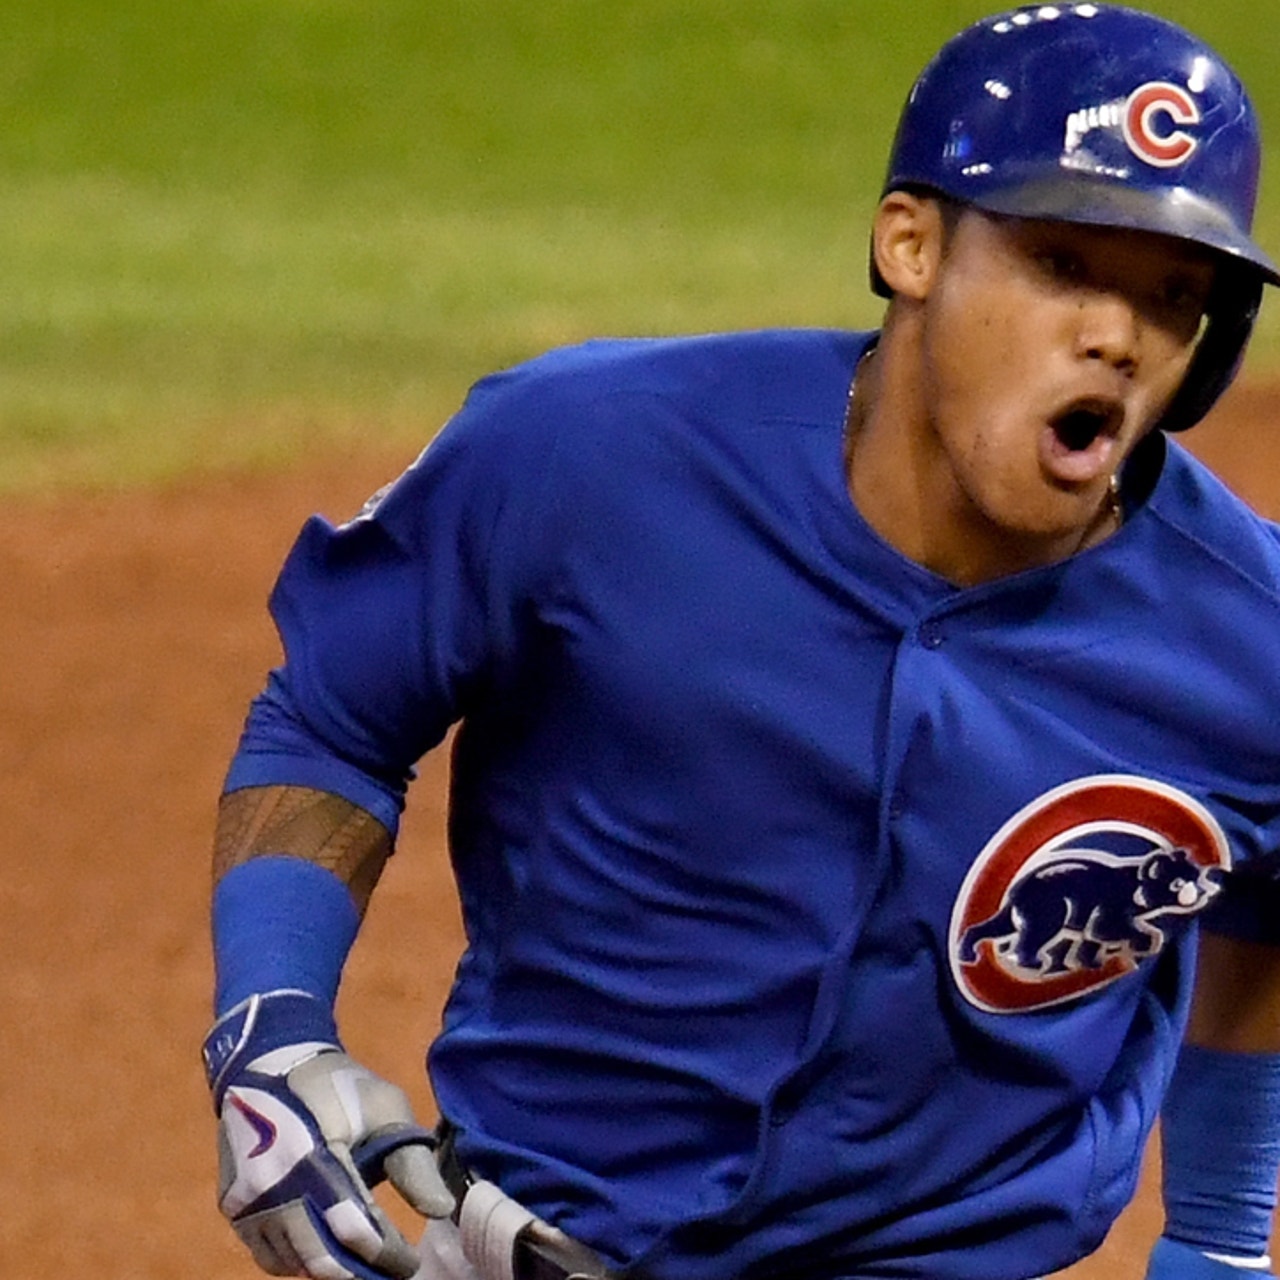 Watch: Addison Russell blasts grand slam in World Series Game 6